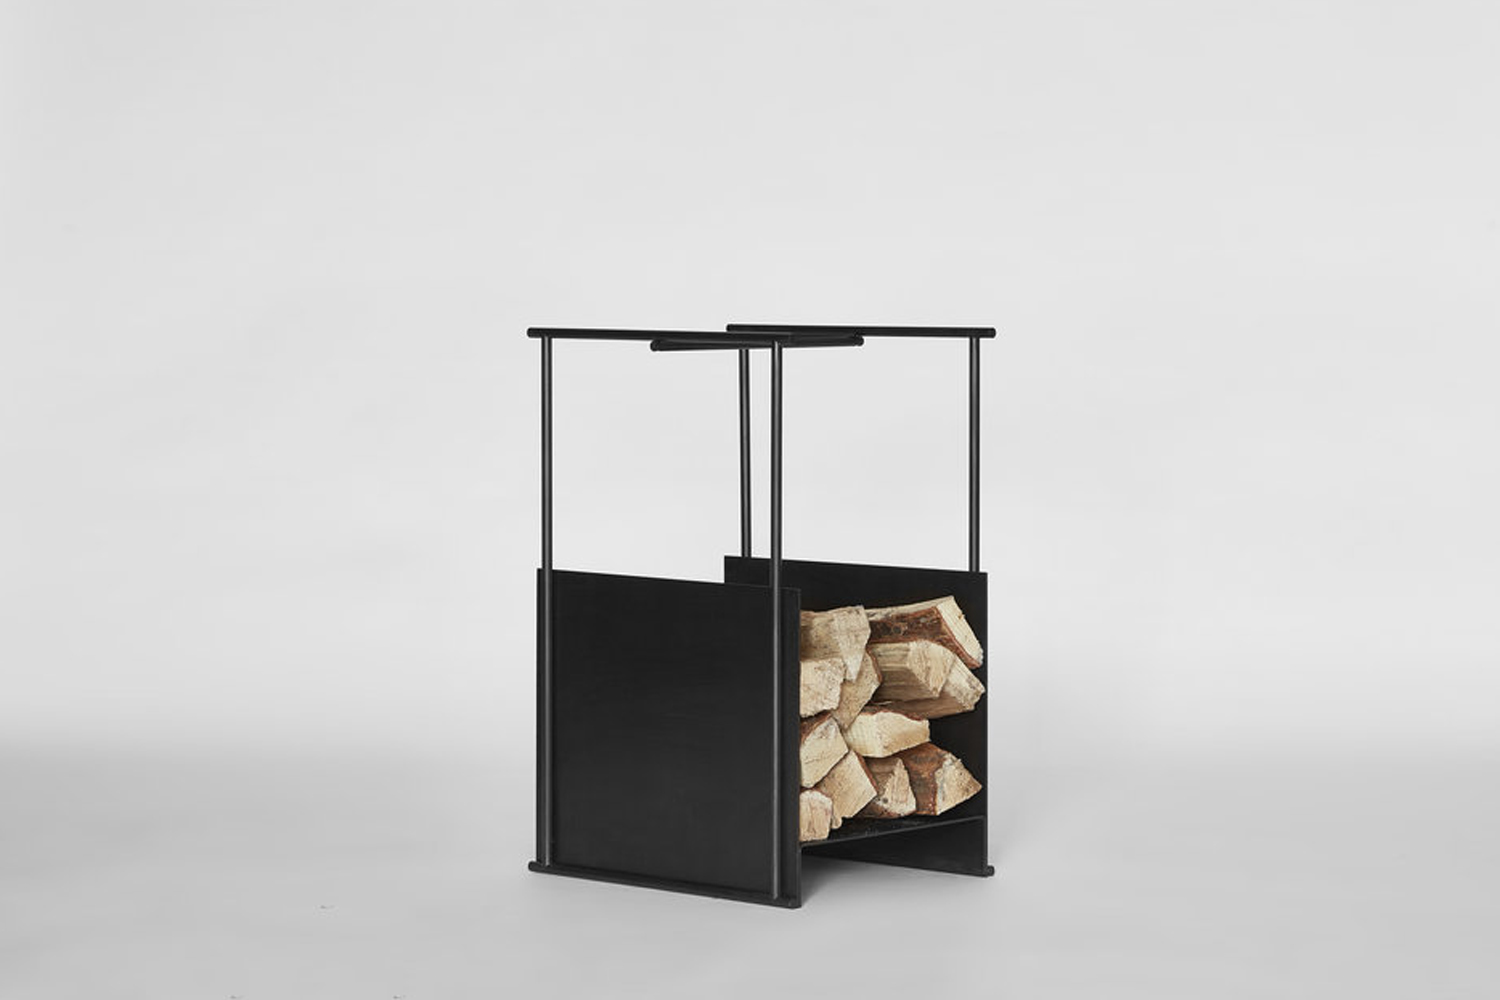 the black firewood hutch, designed by thom fougere for mjölk, is made of a 13